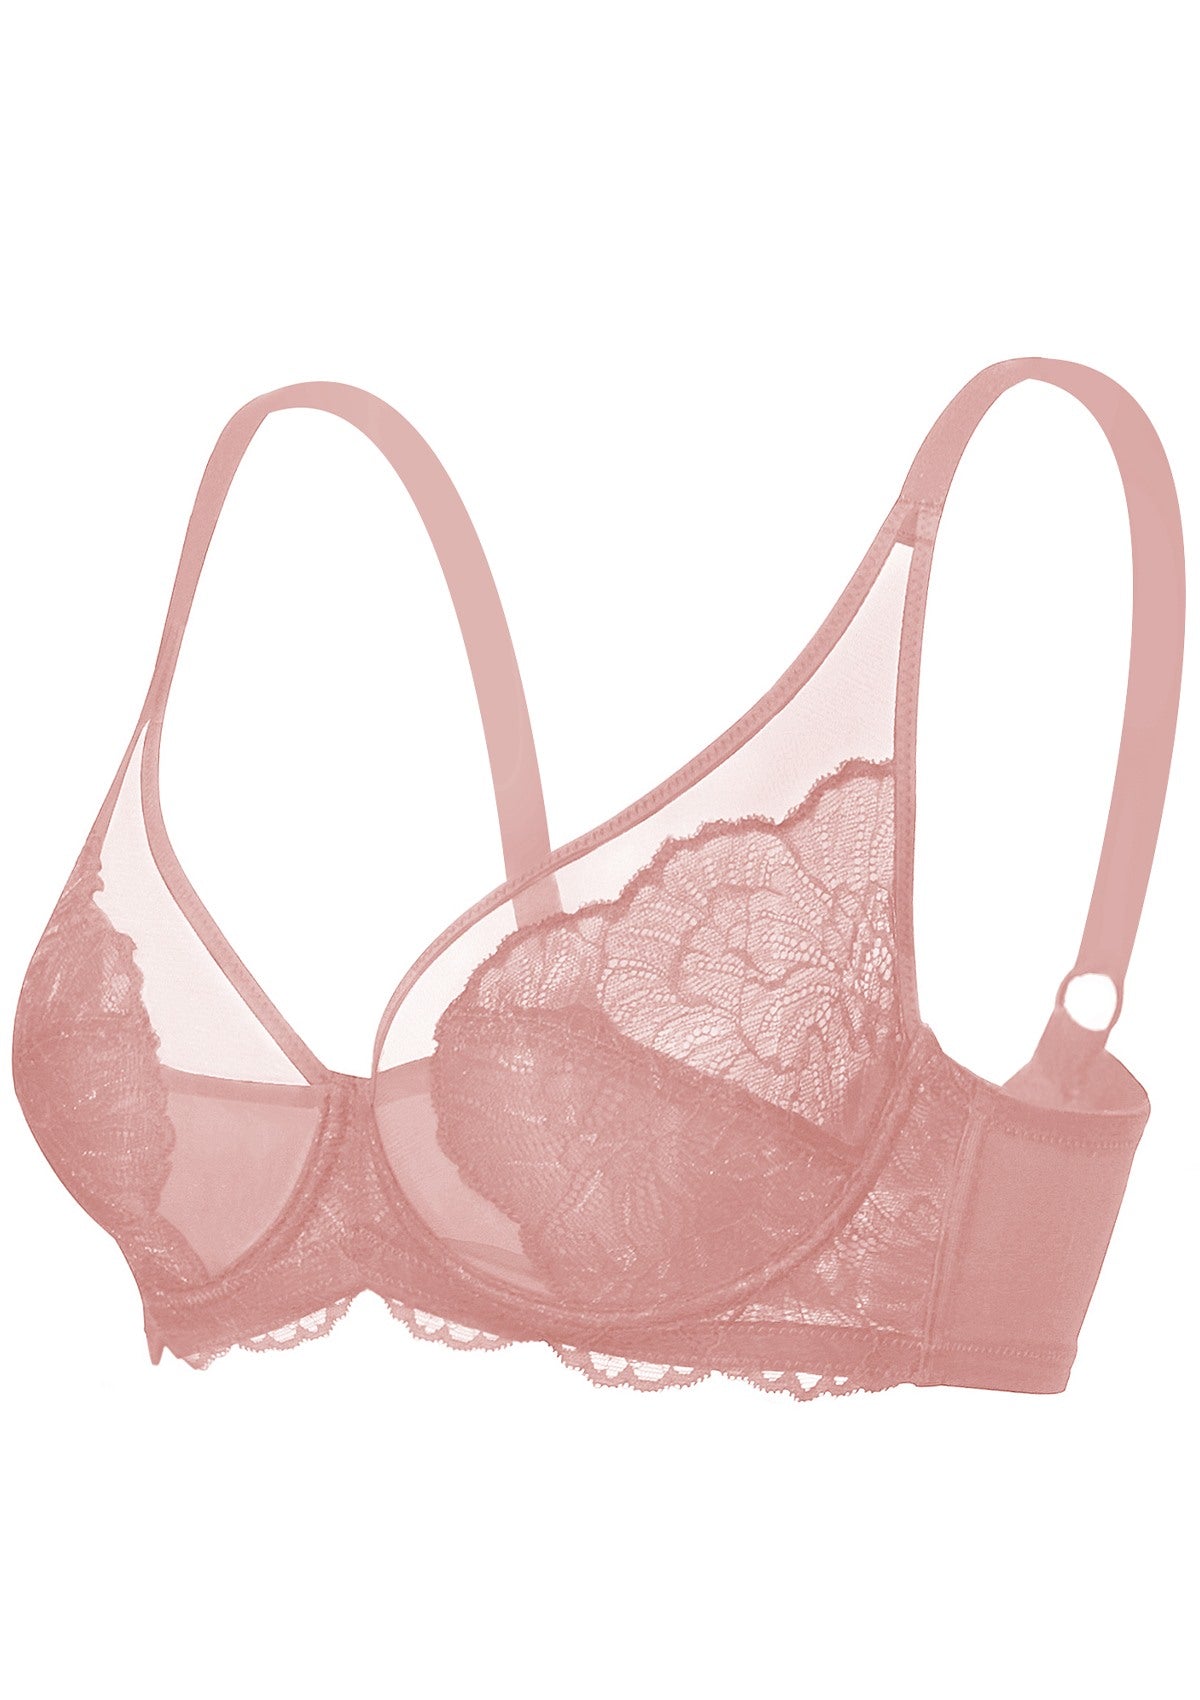 HSIA Blossom Unlined Lace Underwire Bra - Raspberry / 36 / D